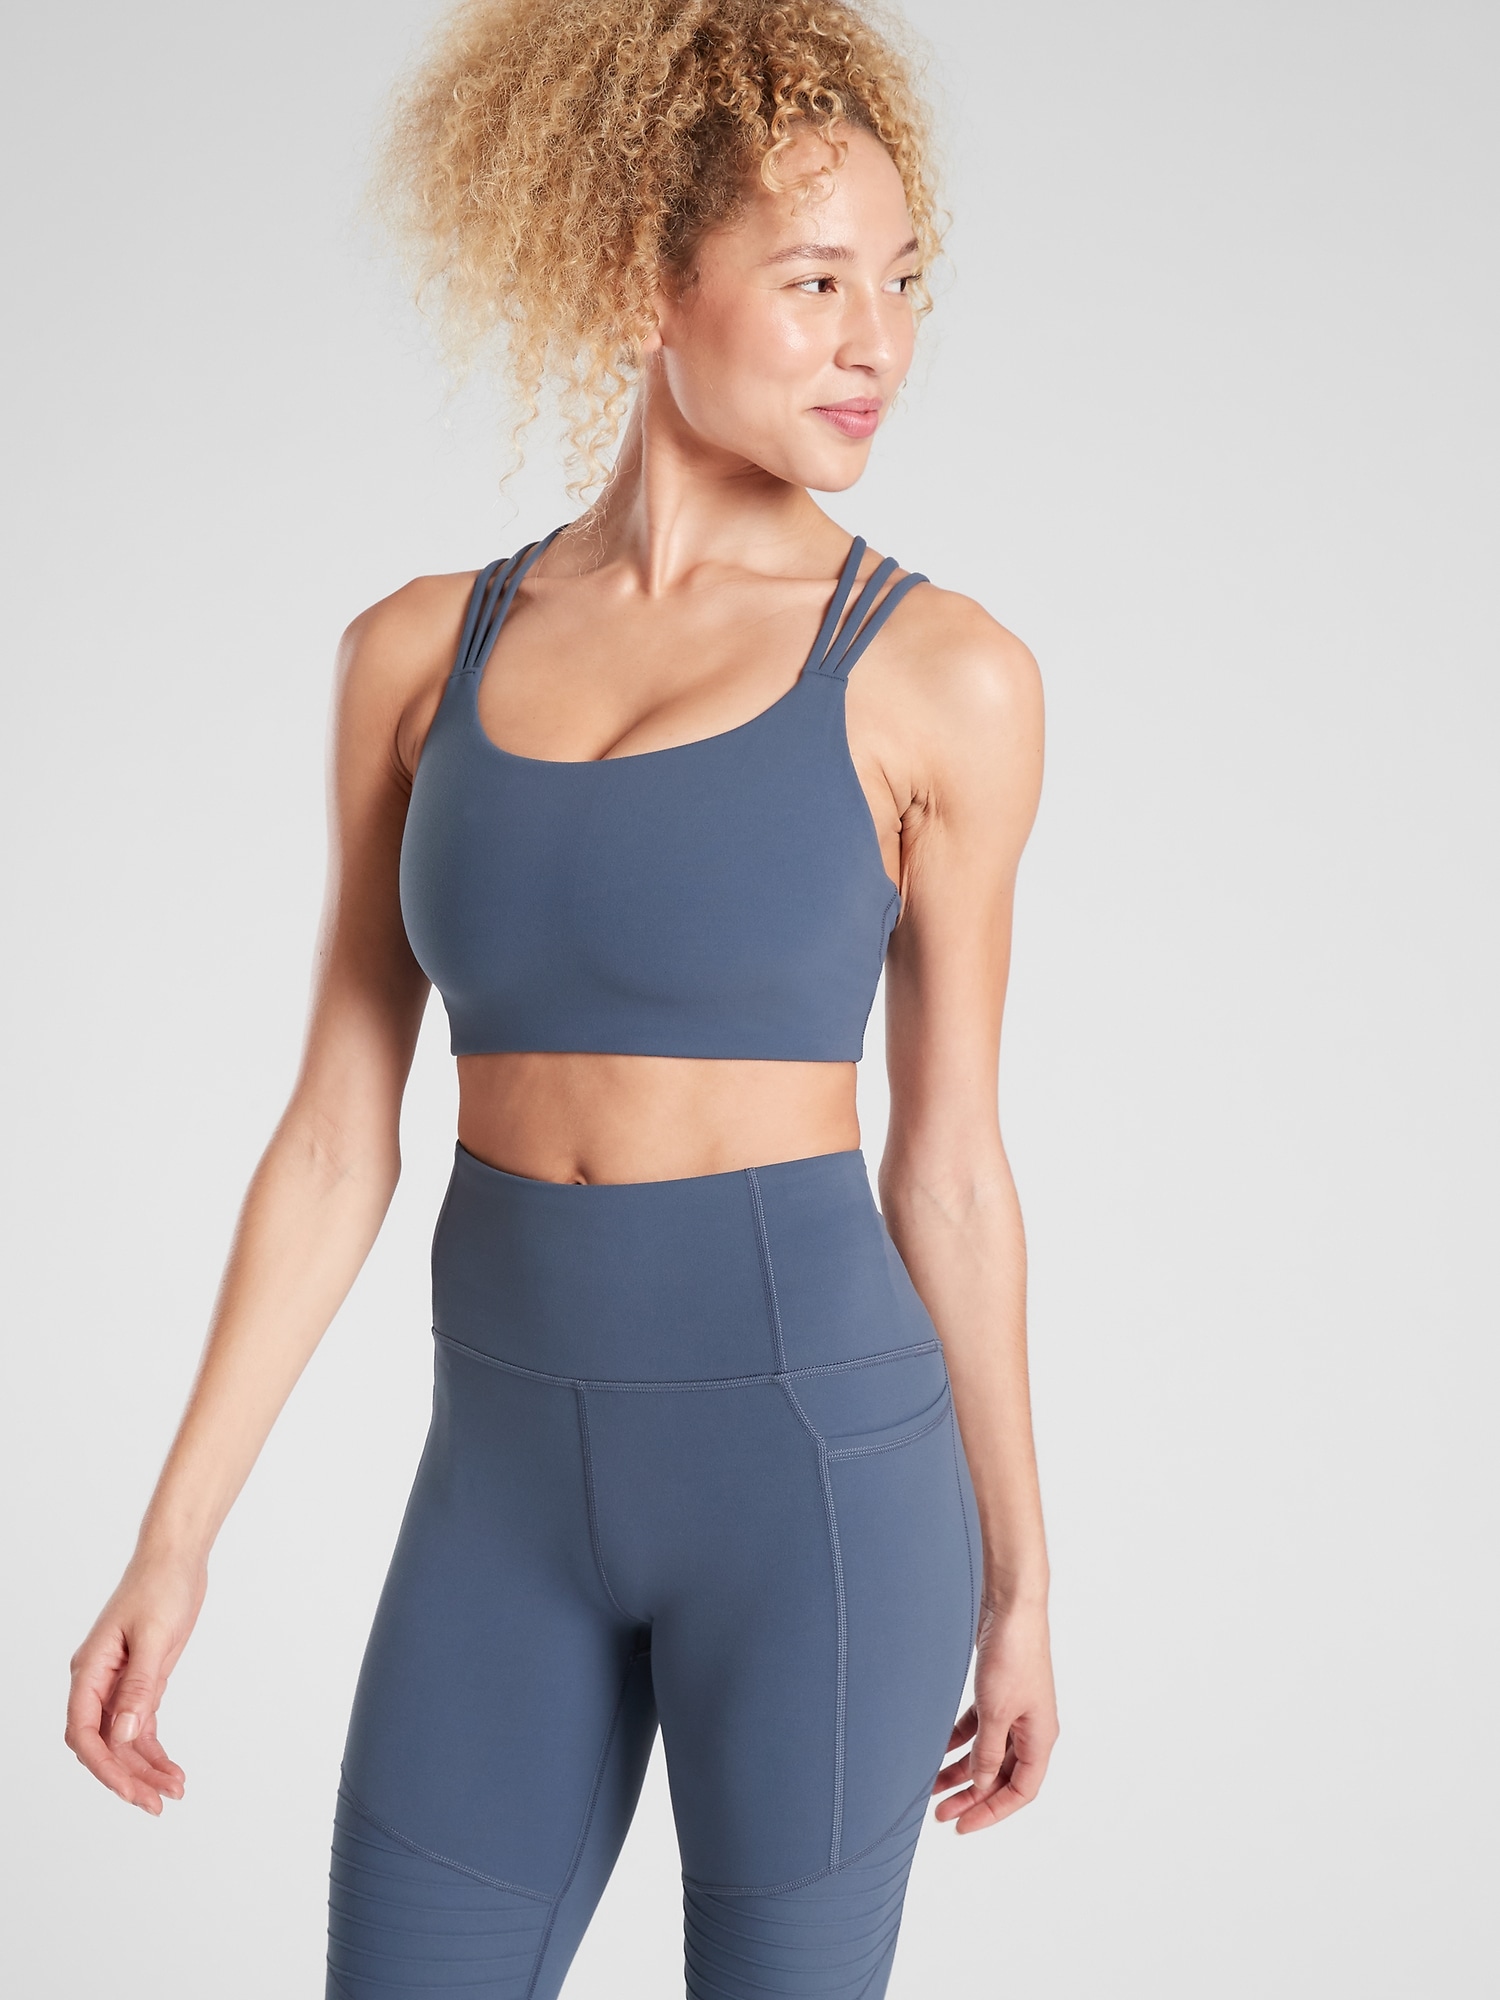 Athleta Hyper Focused Bra White Size XS - $17 (65% Off Retail) - From Rylie